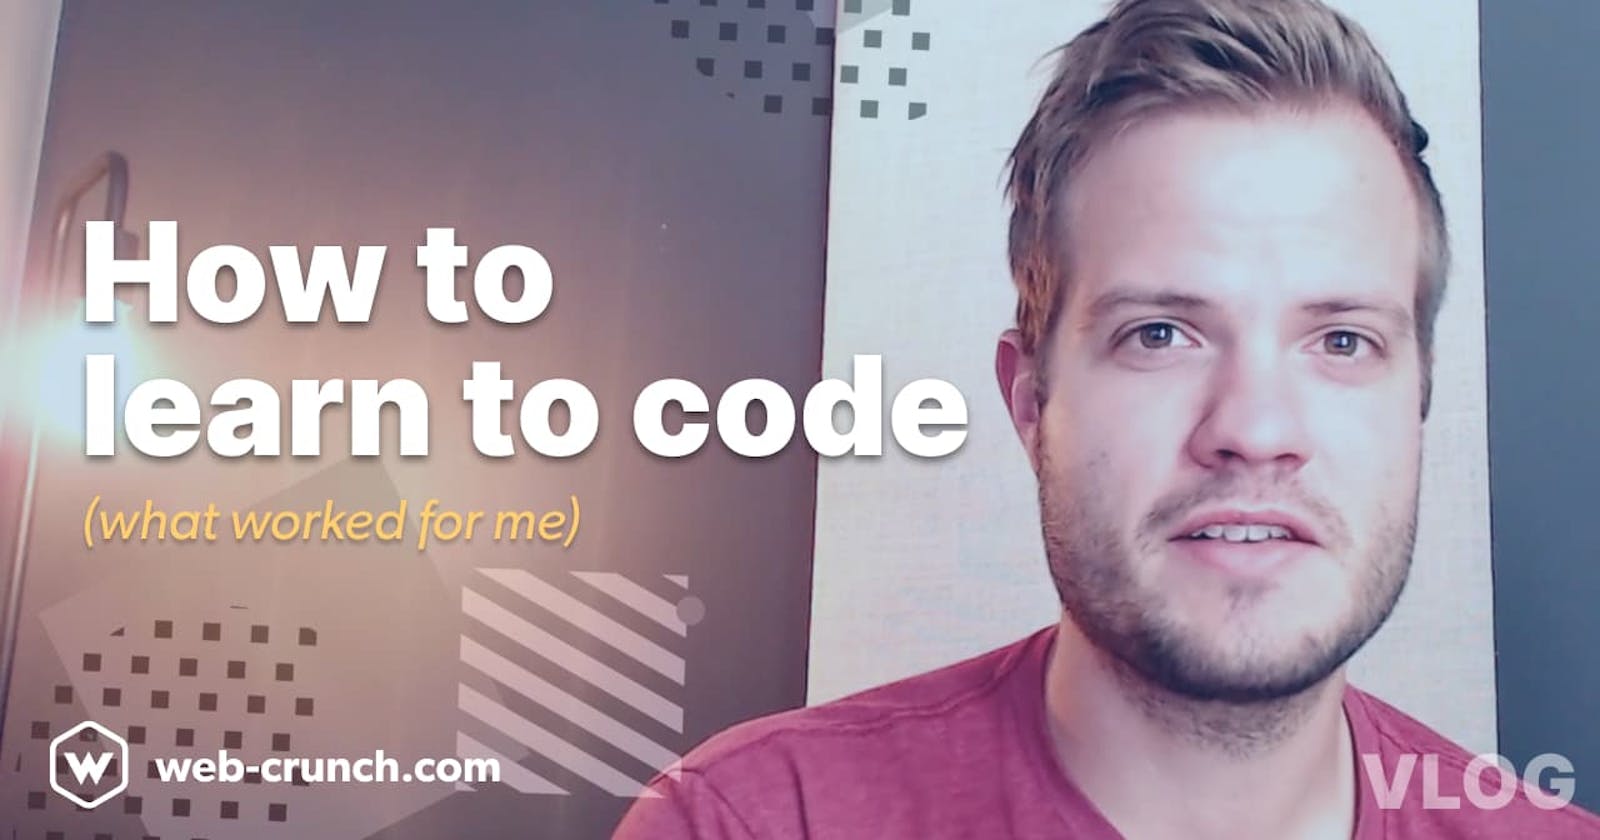 How to learn to code